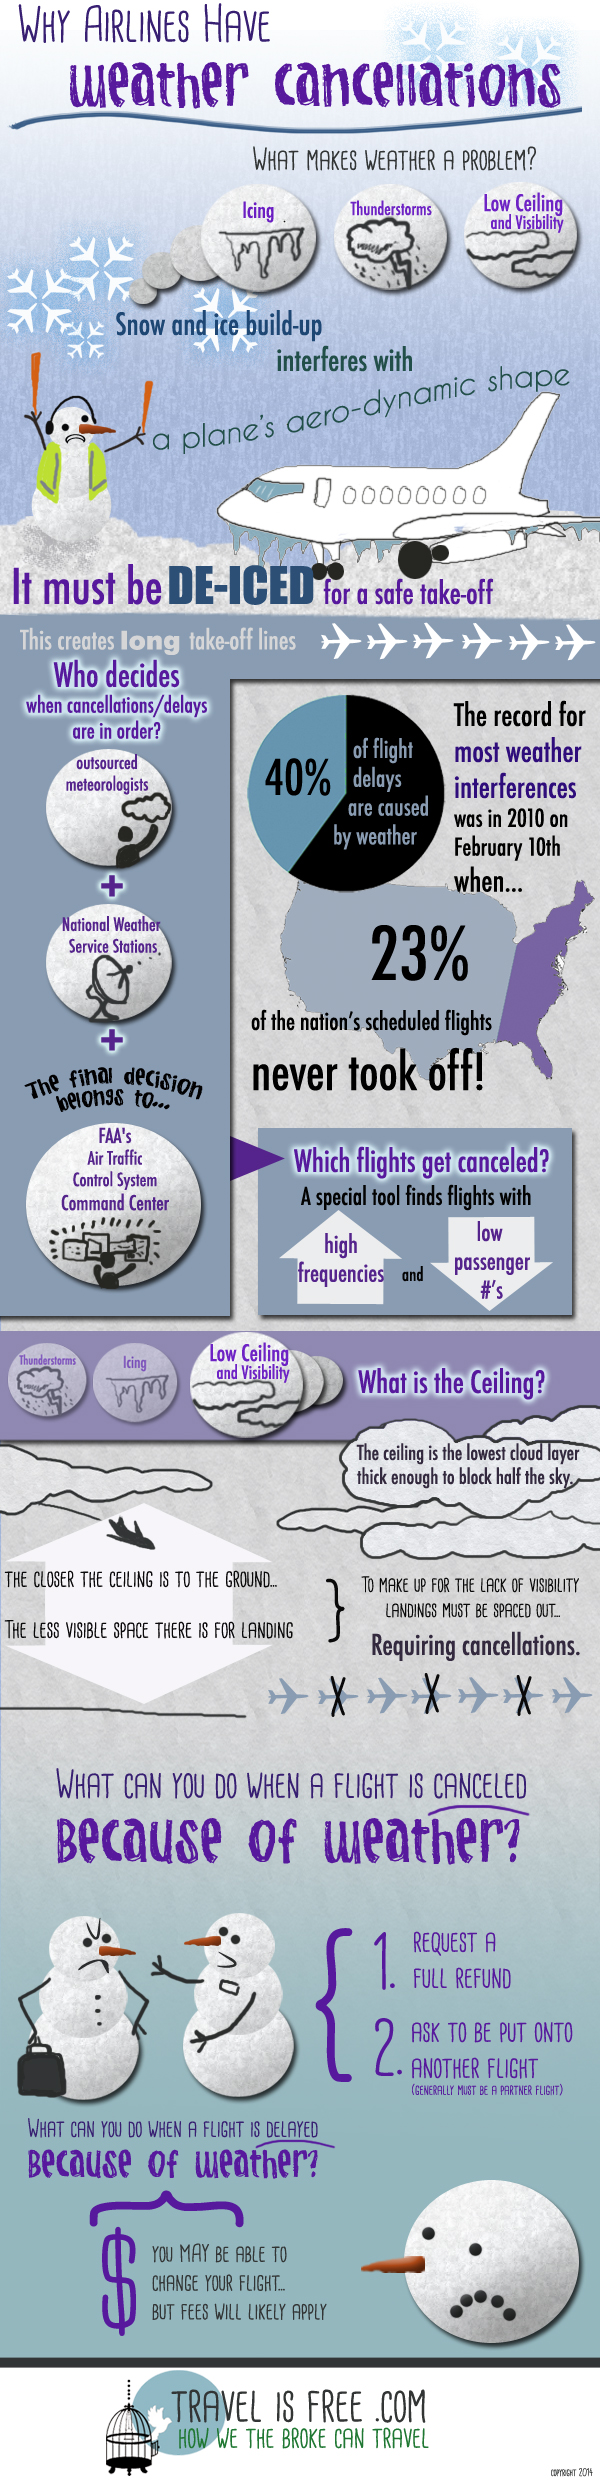 Why Airlines Have Weather Cancellations